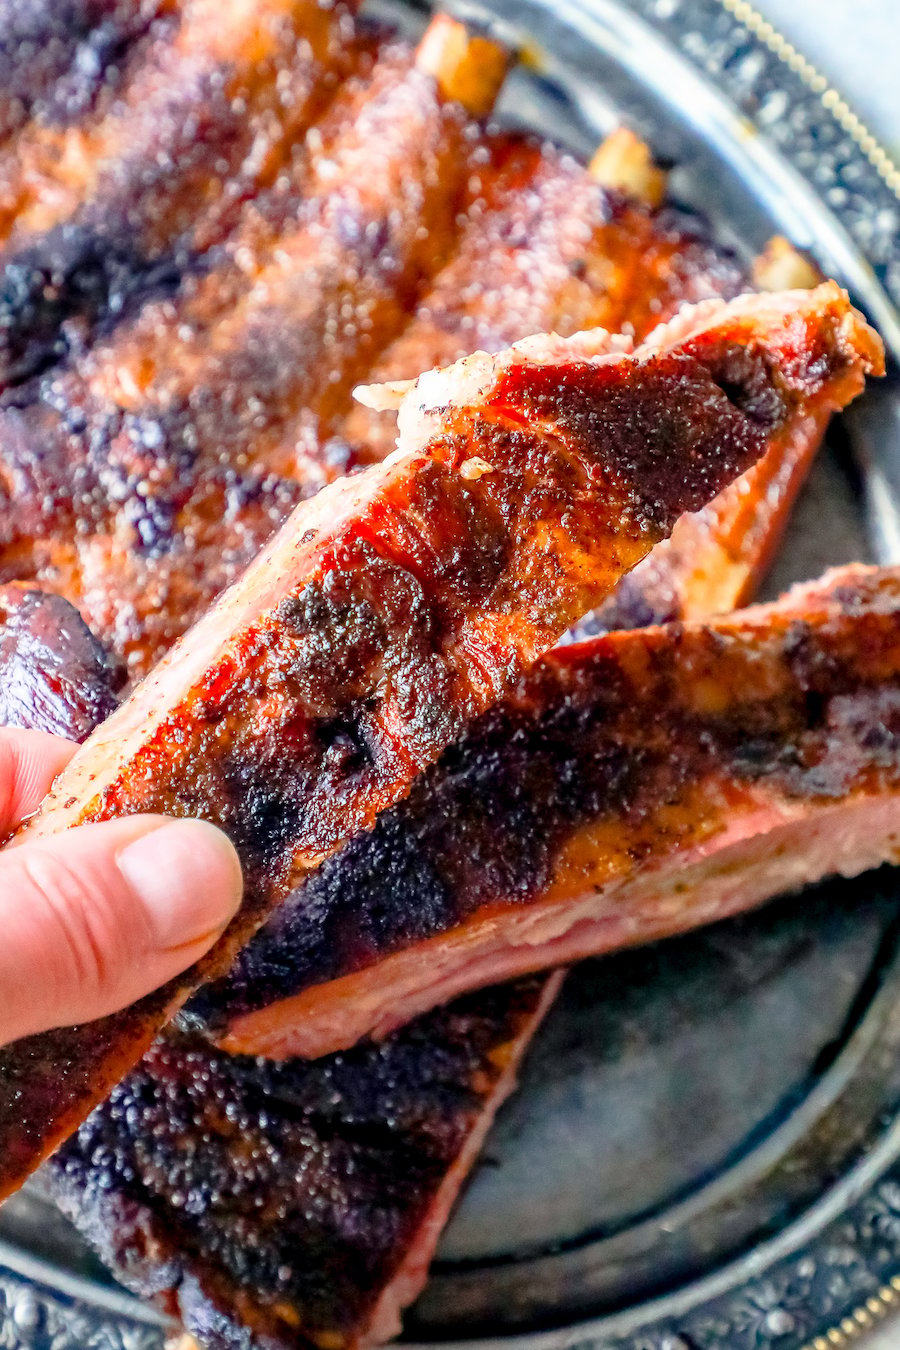 picture of a hand holding a smoked rib